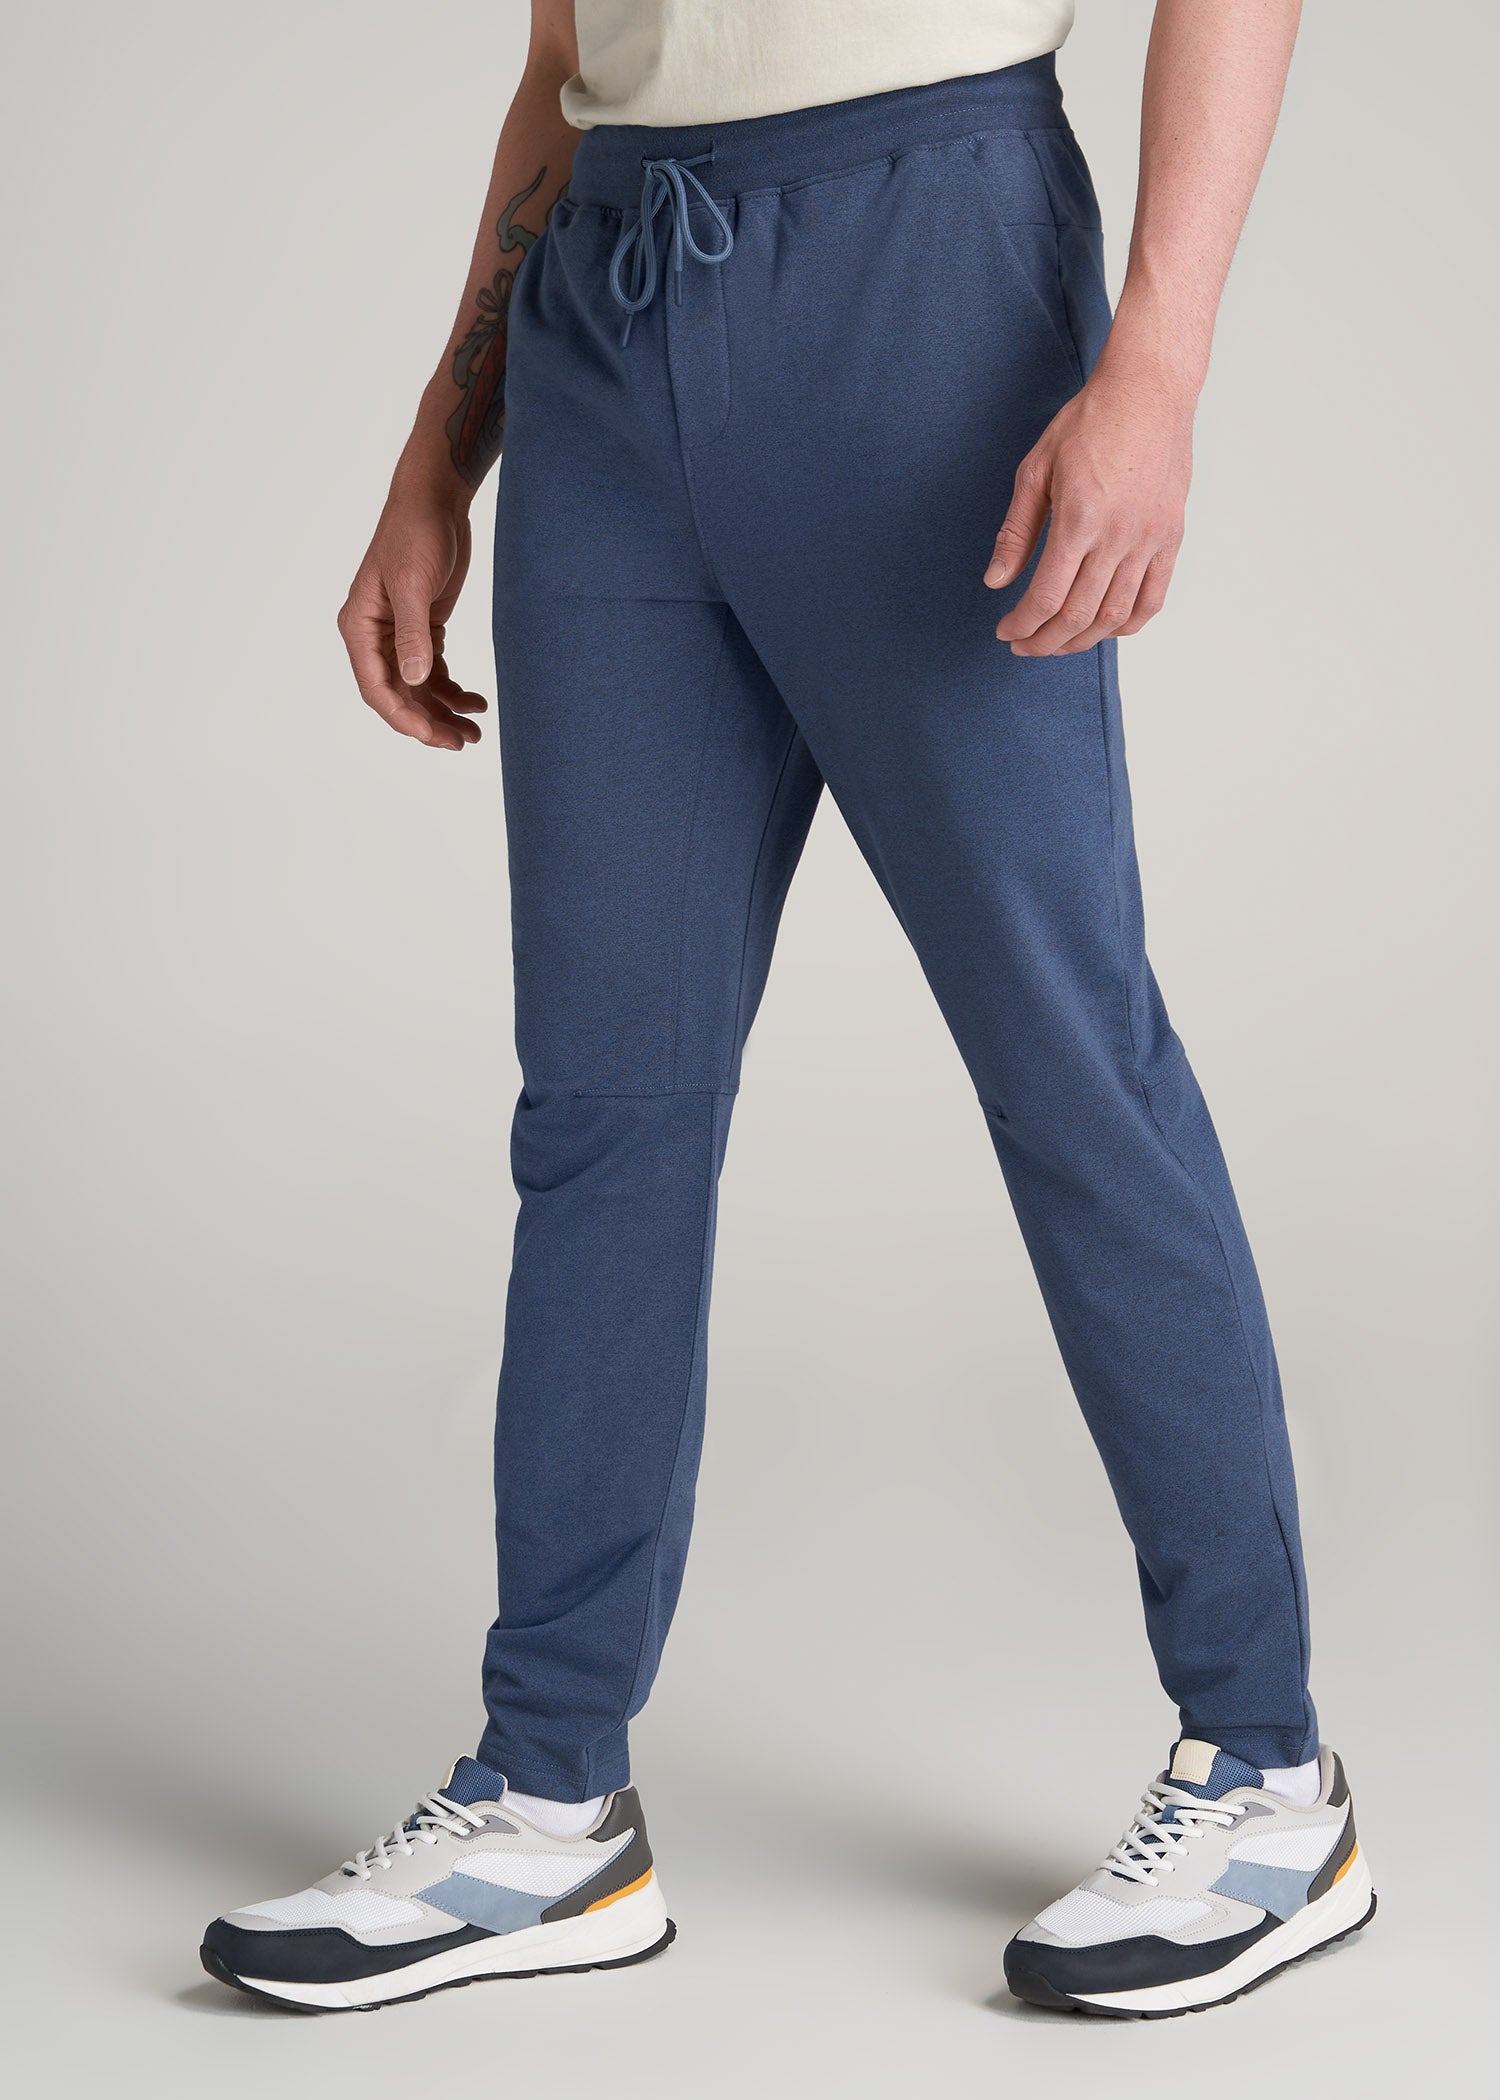 A.T. Performance French Terry Sweatpants for Tall Men in Tech Navy Mix